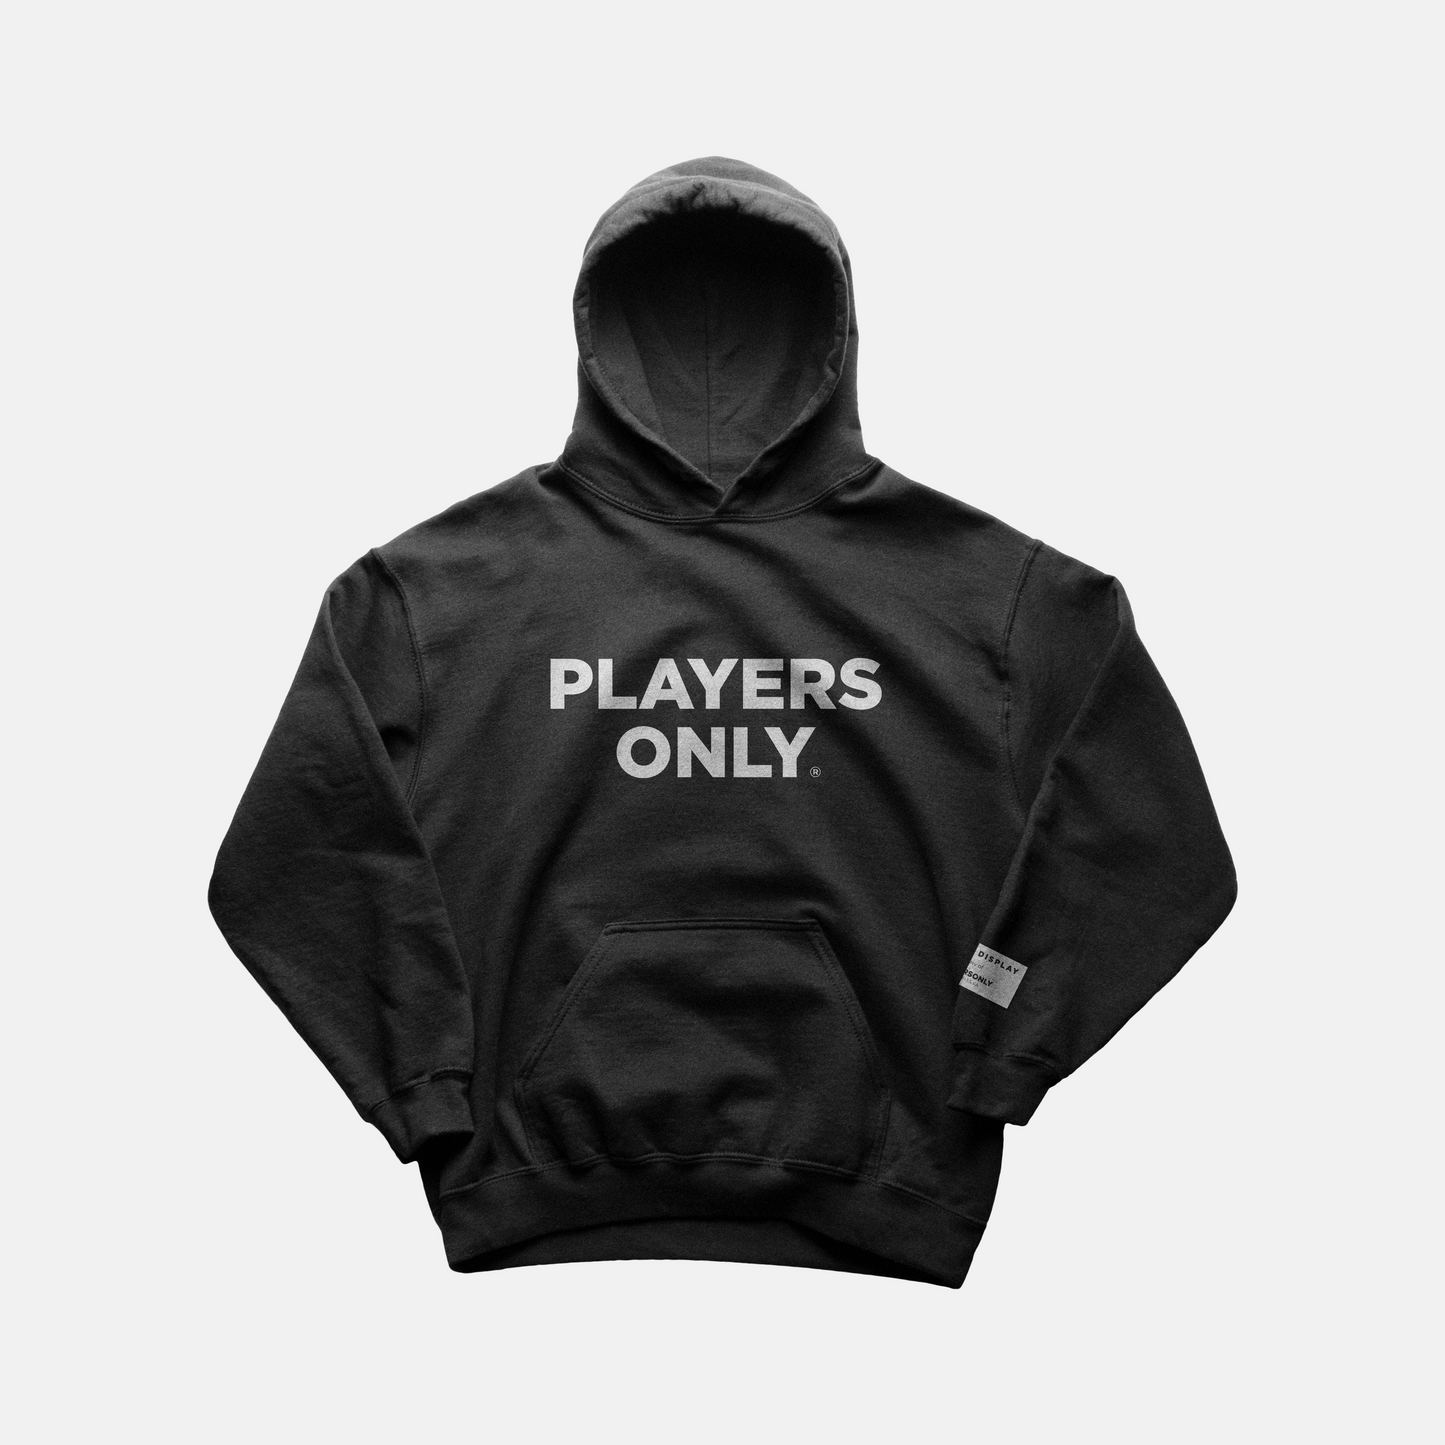 Goat on Display Large PlayersOnly Wordmark Hoodie